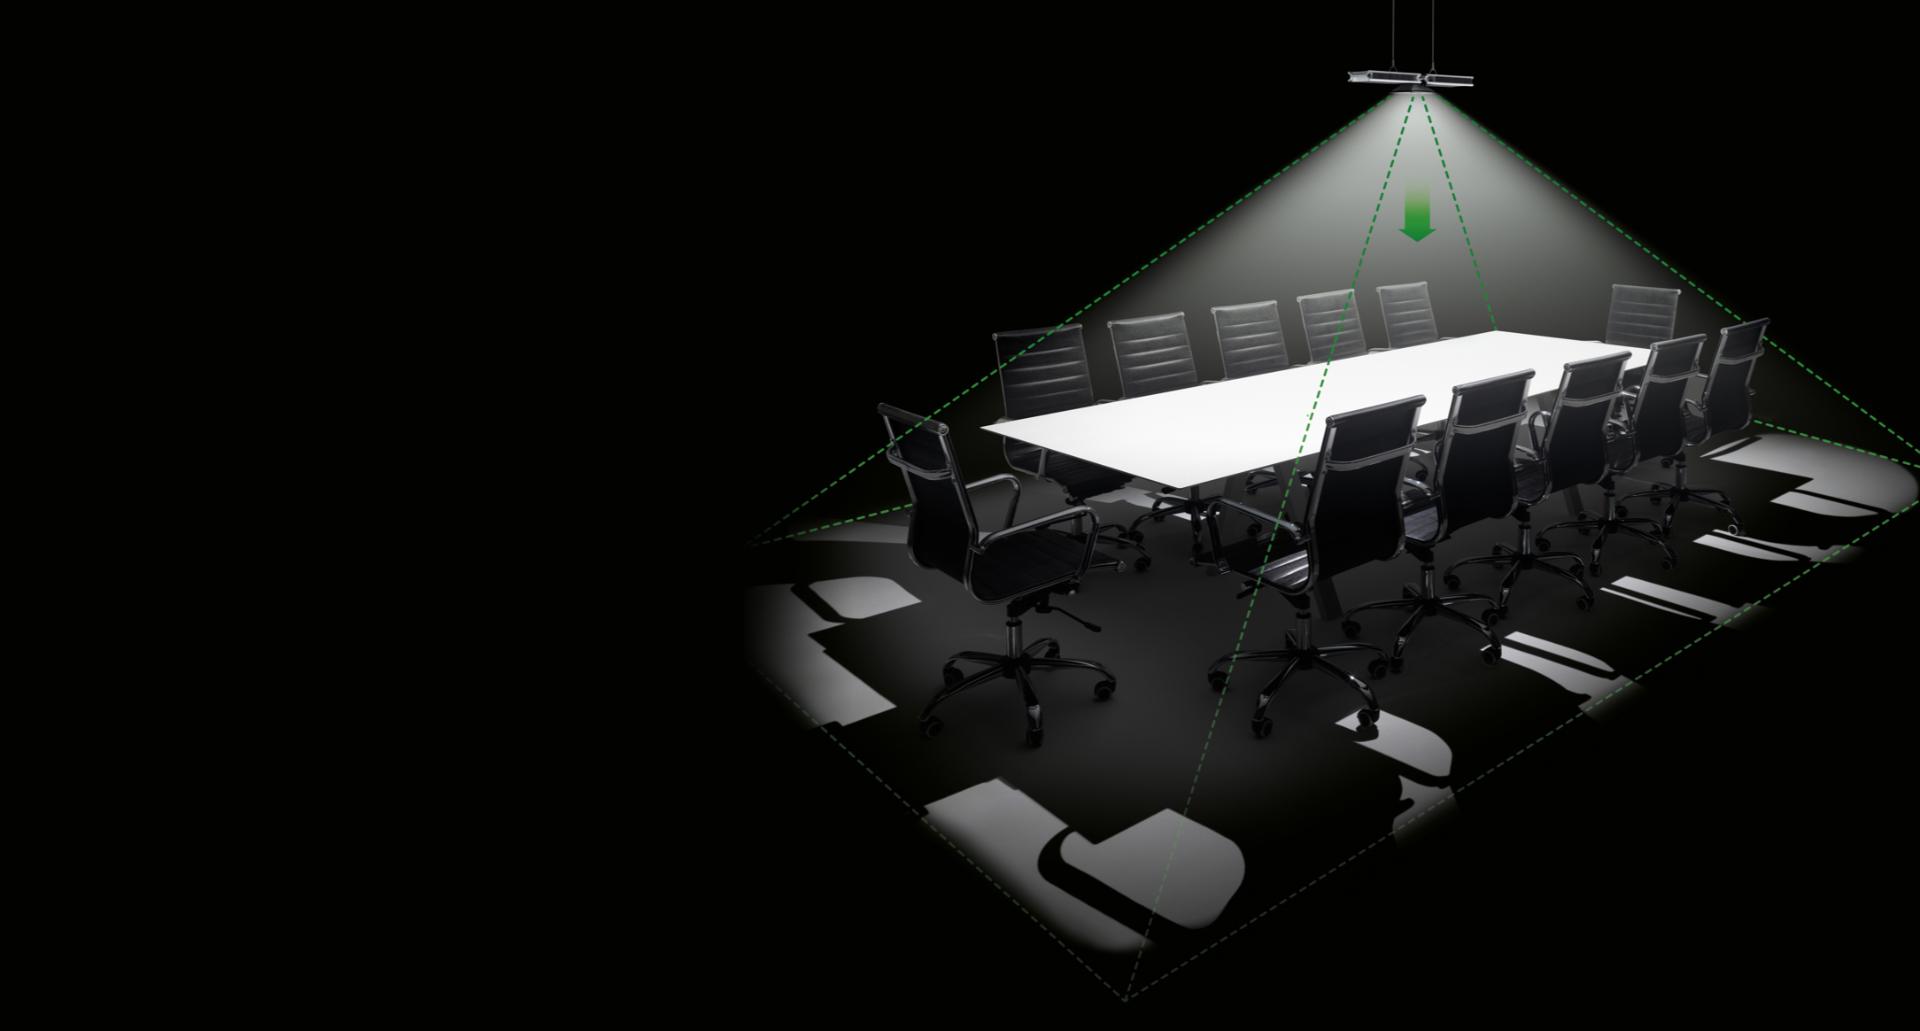 Dyson Cu-Beam Down light with targeted pyramid of light on boardroom table